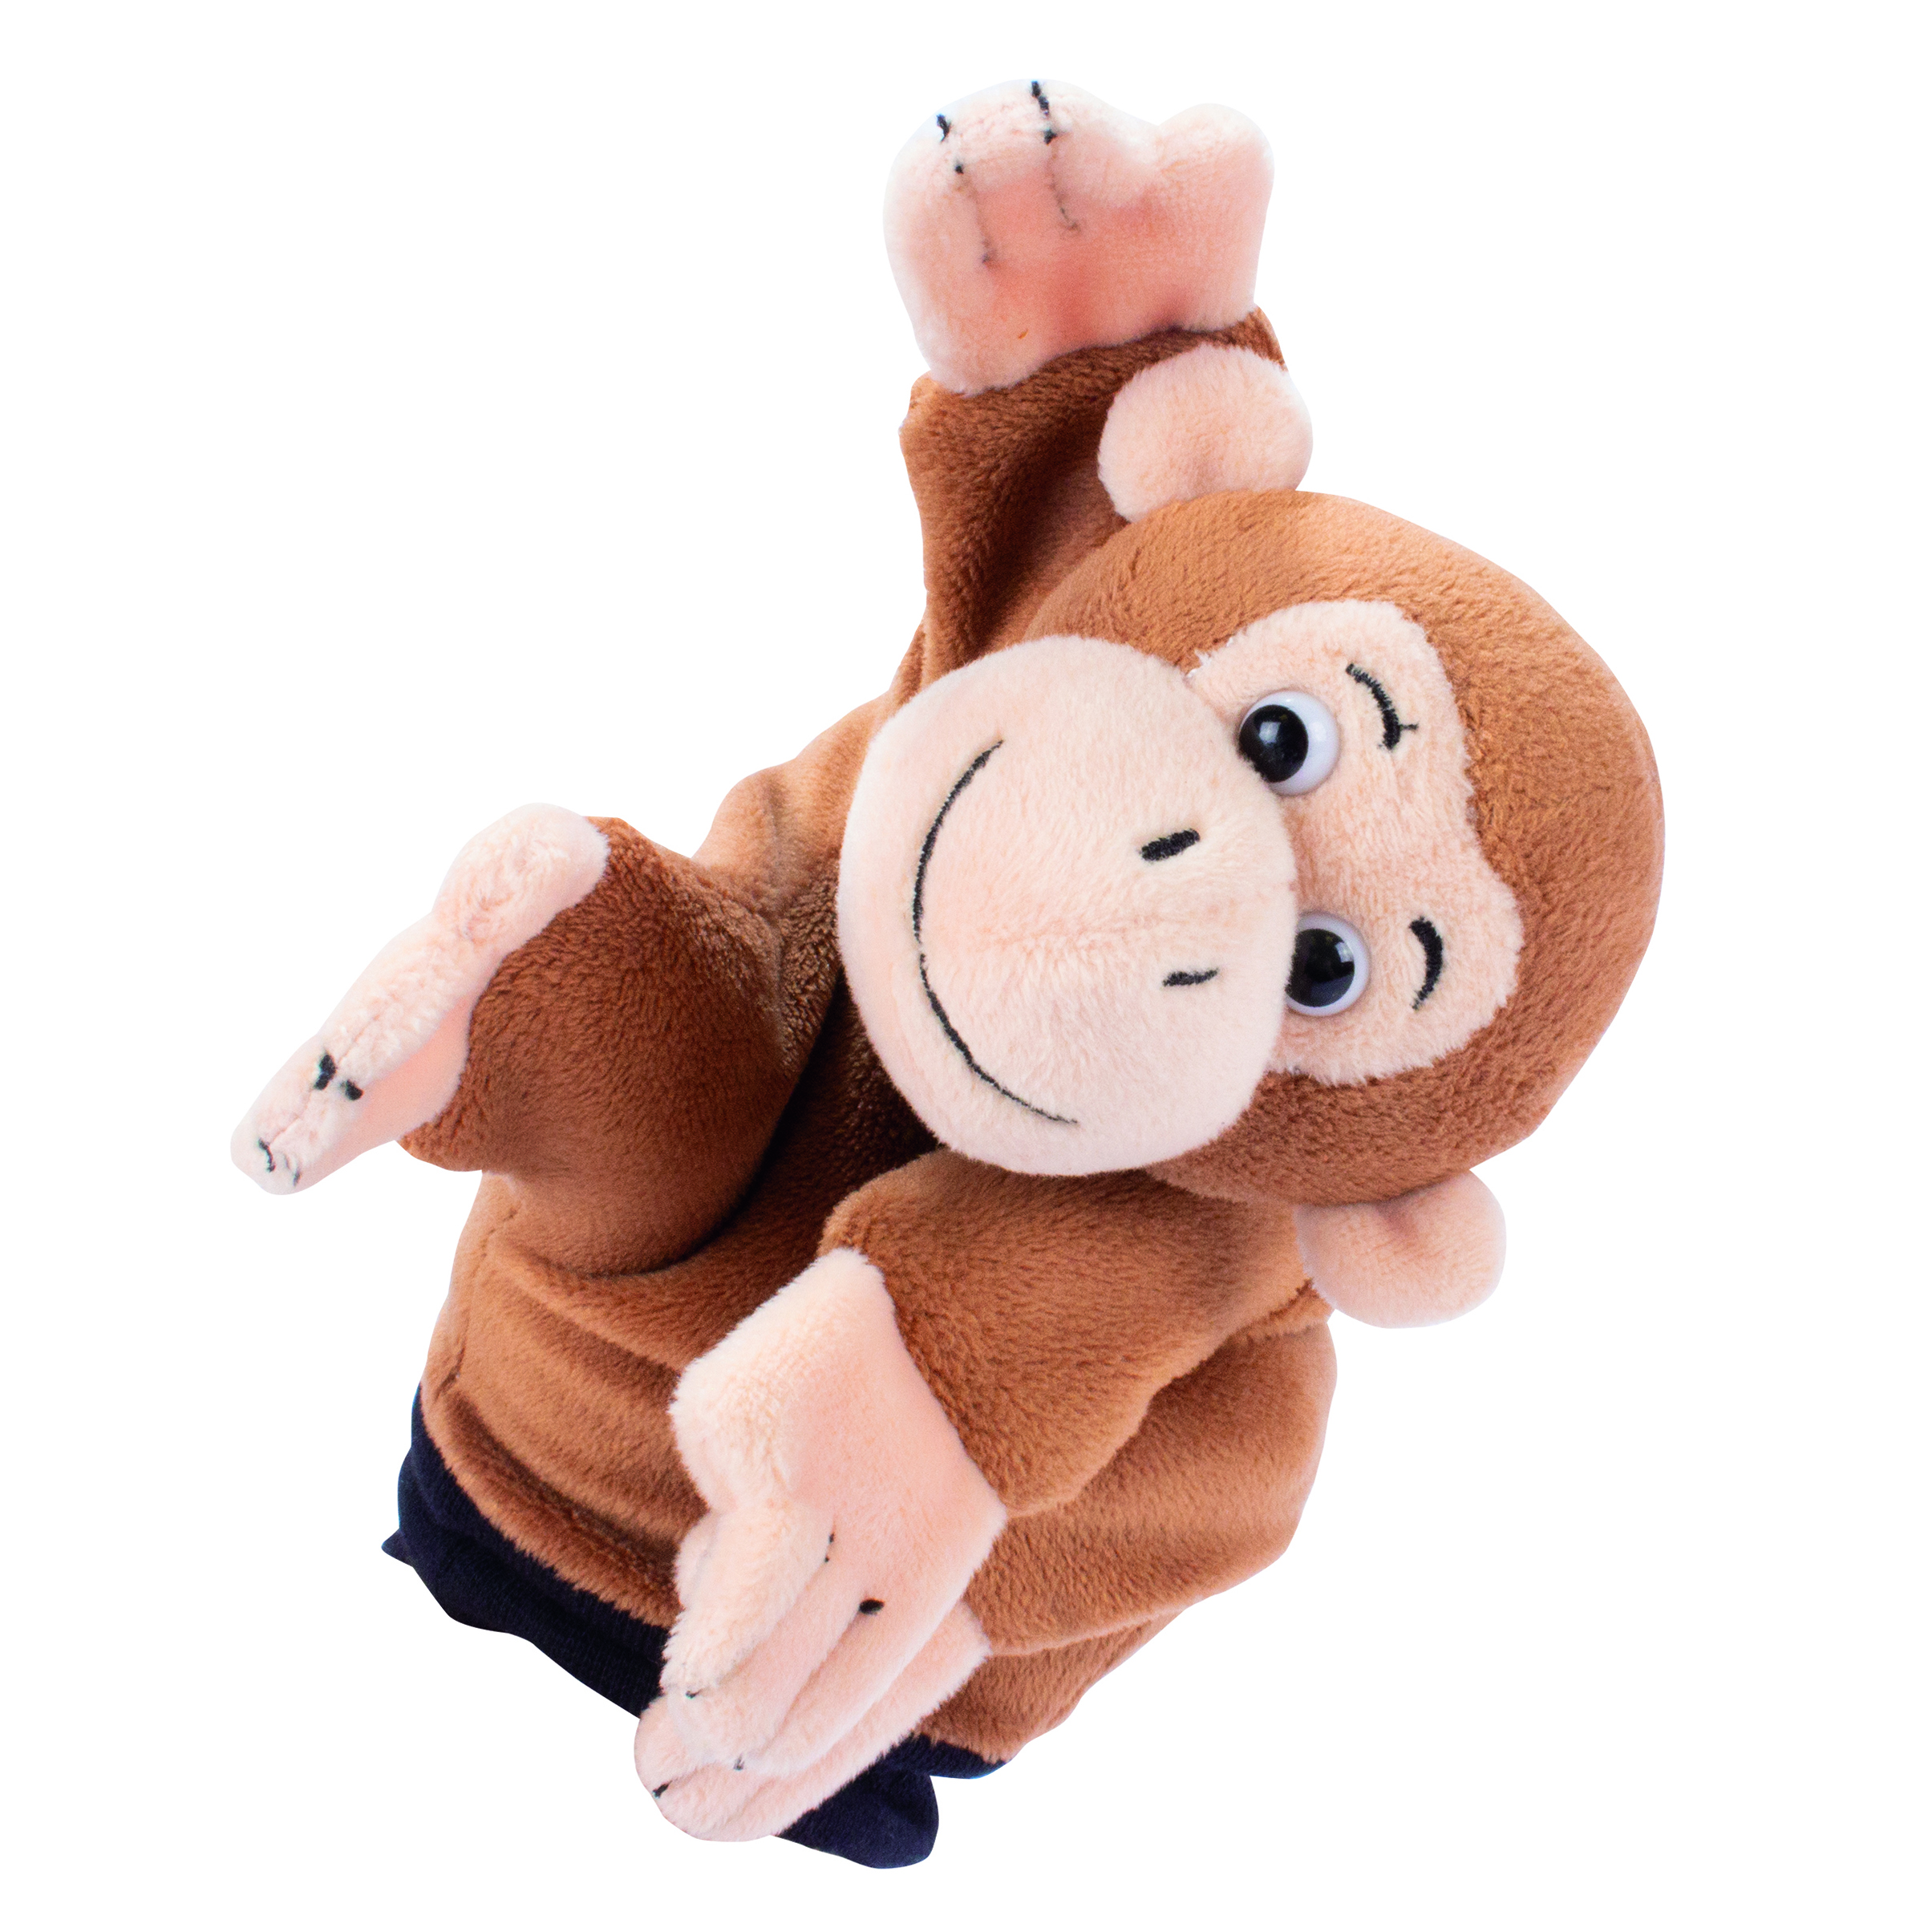 Hand puppet monkey - by Beleduc